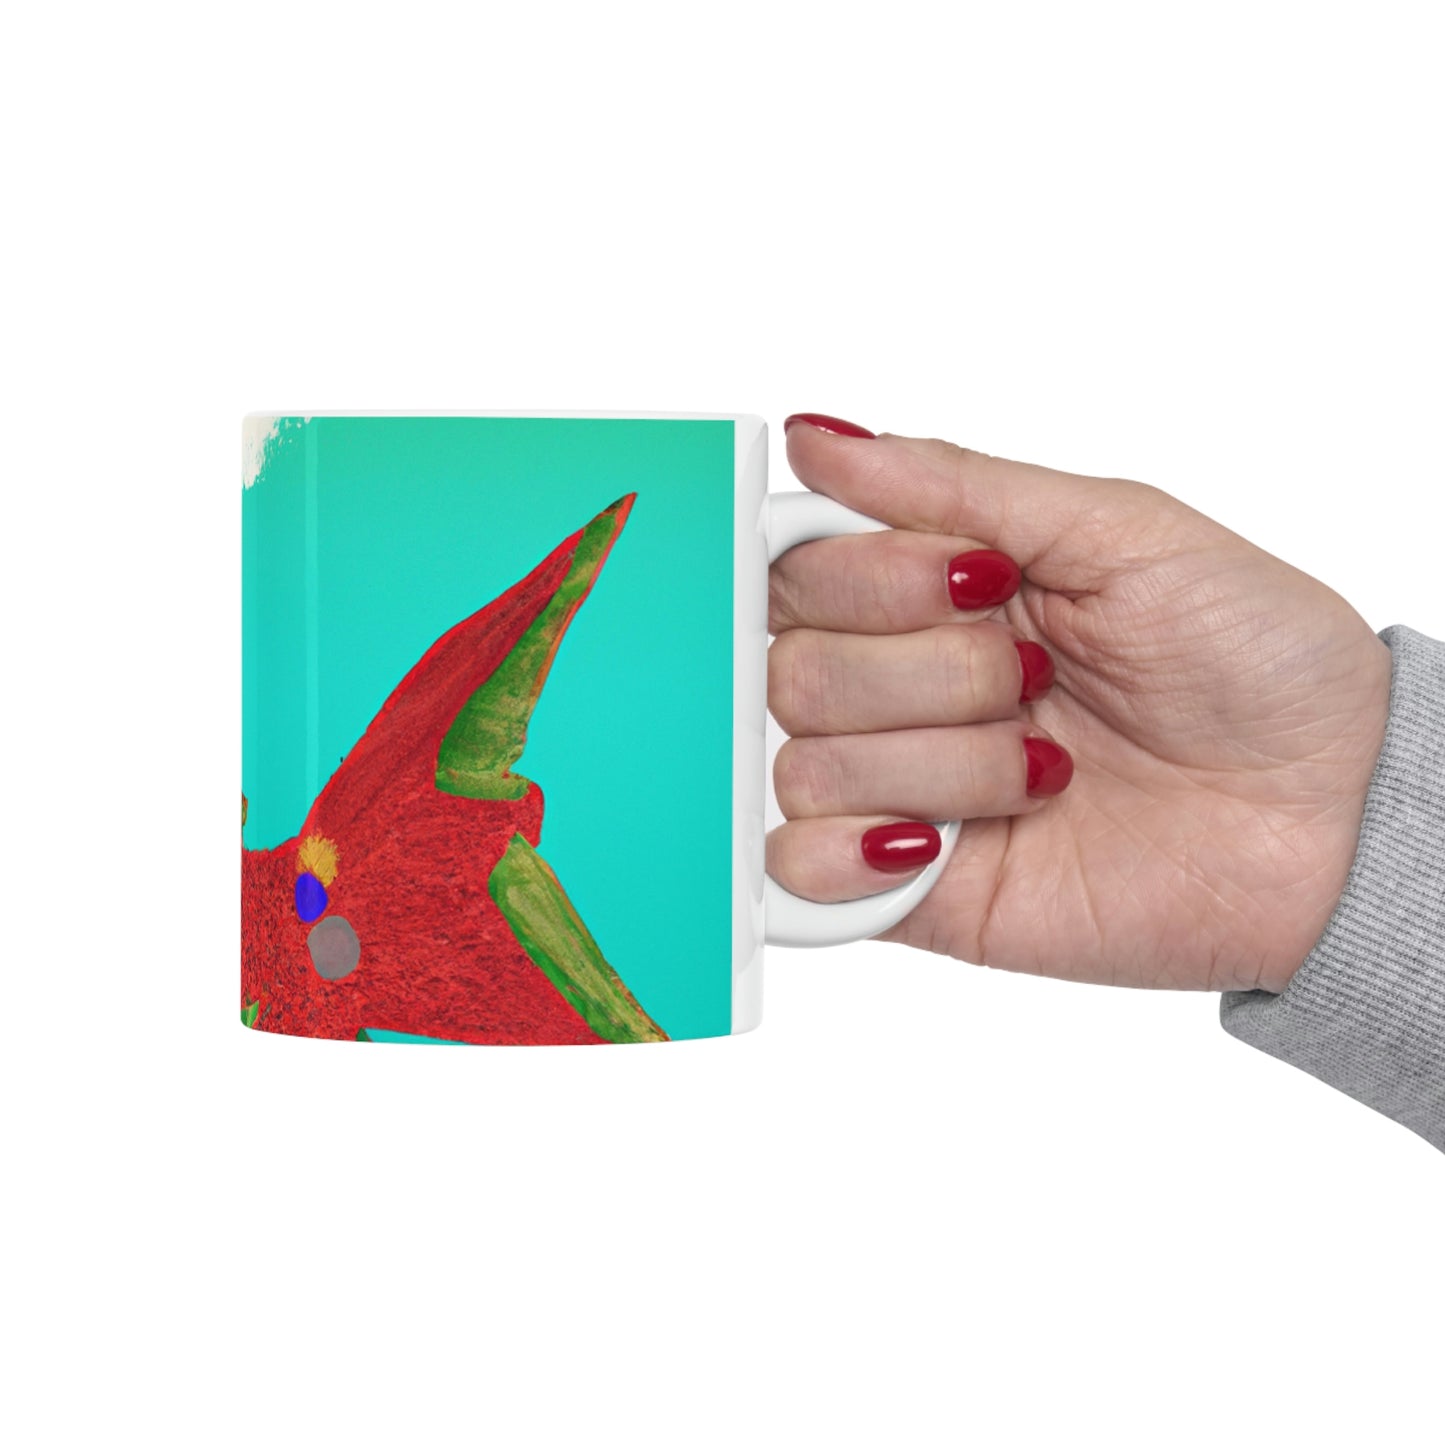 The Mysterious Flying Fish and Its Enigmatic Secret - The Alien Ceramic Mug 11 oz